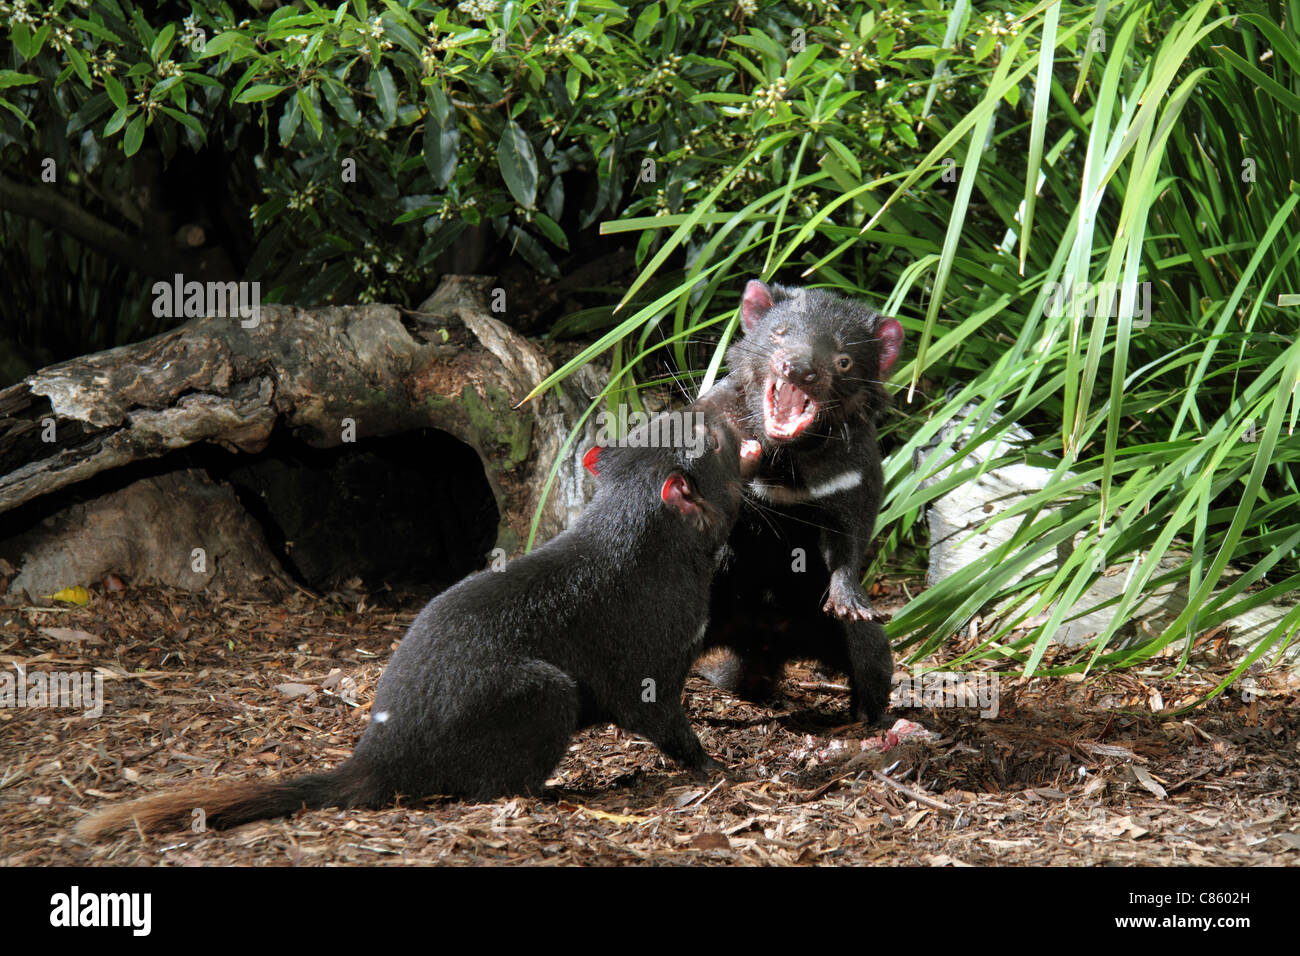 Tasmanian devil, sarcophilus harrisi two captive adults fighting over food Stock Photo